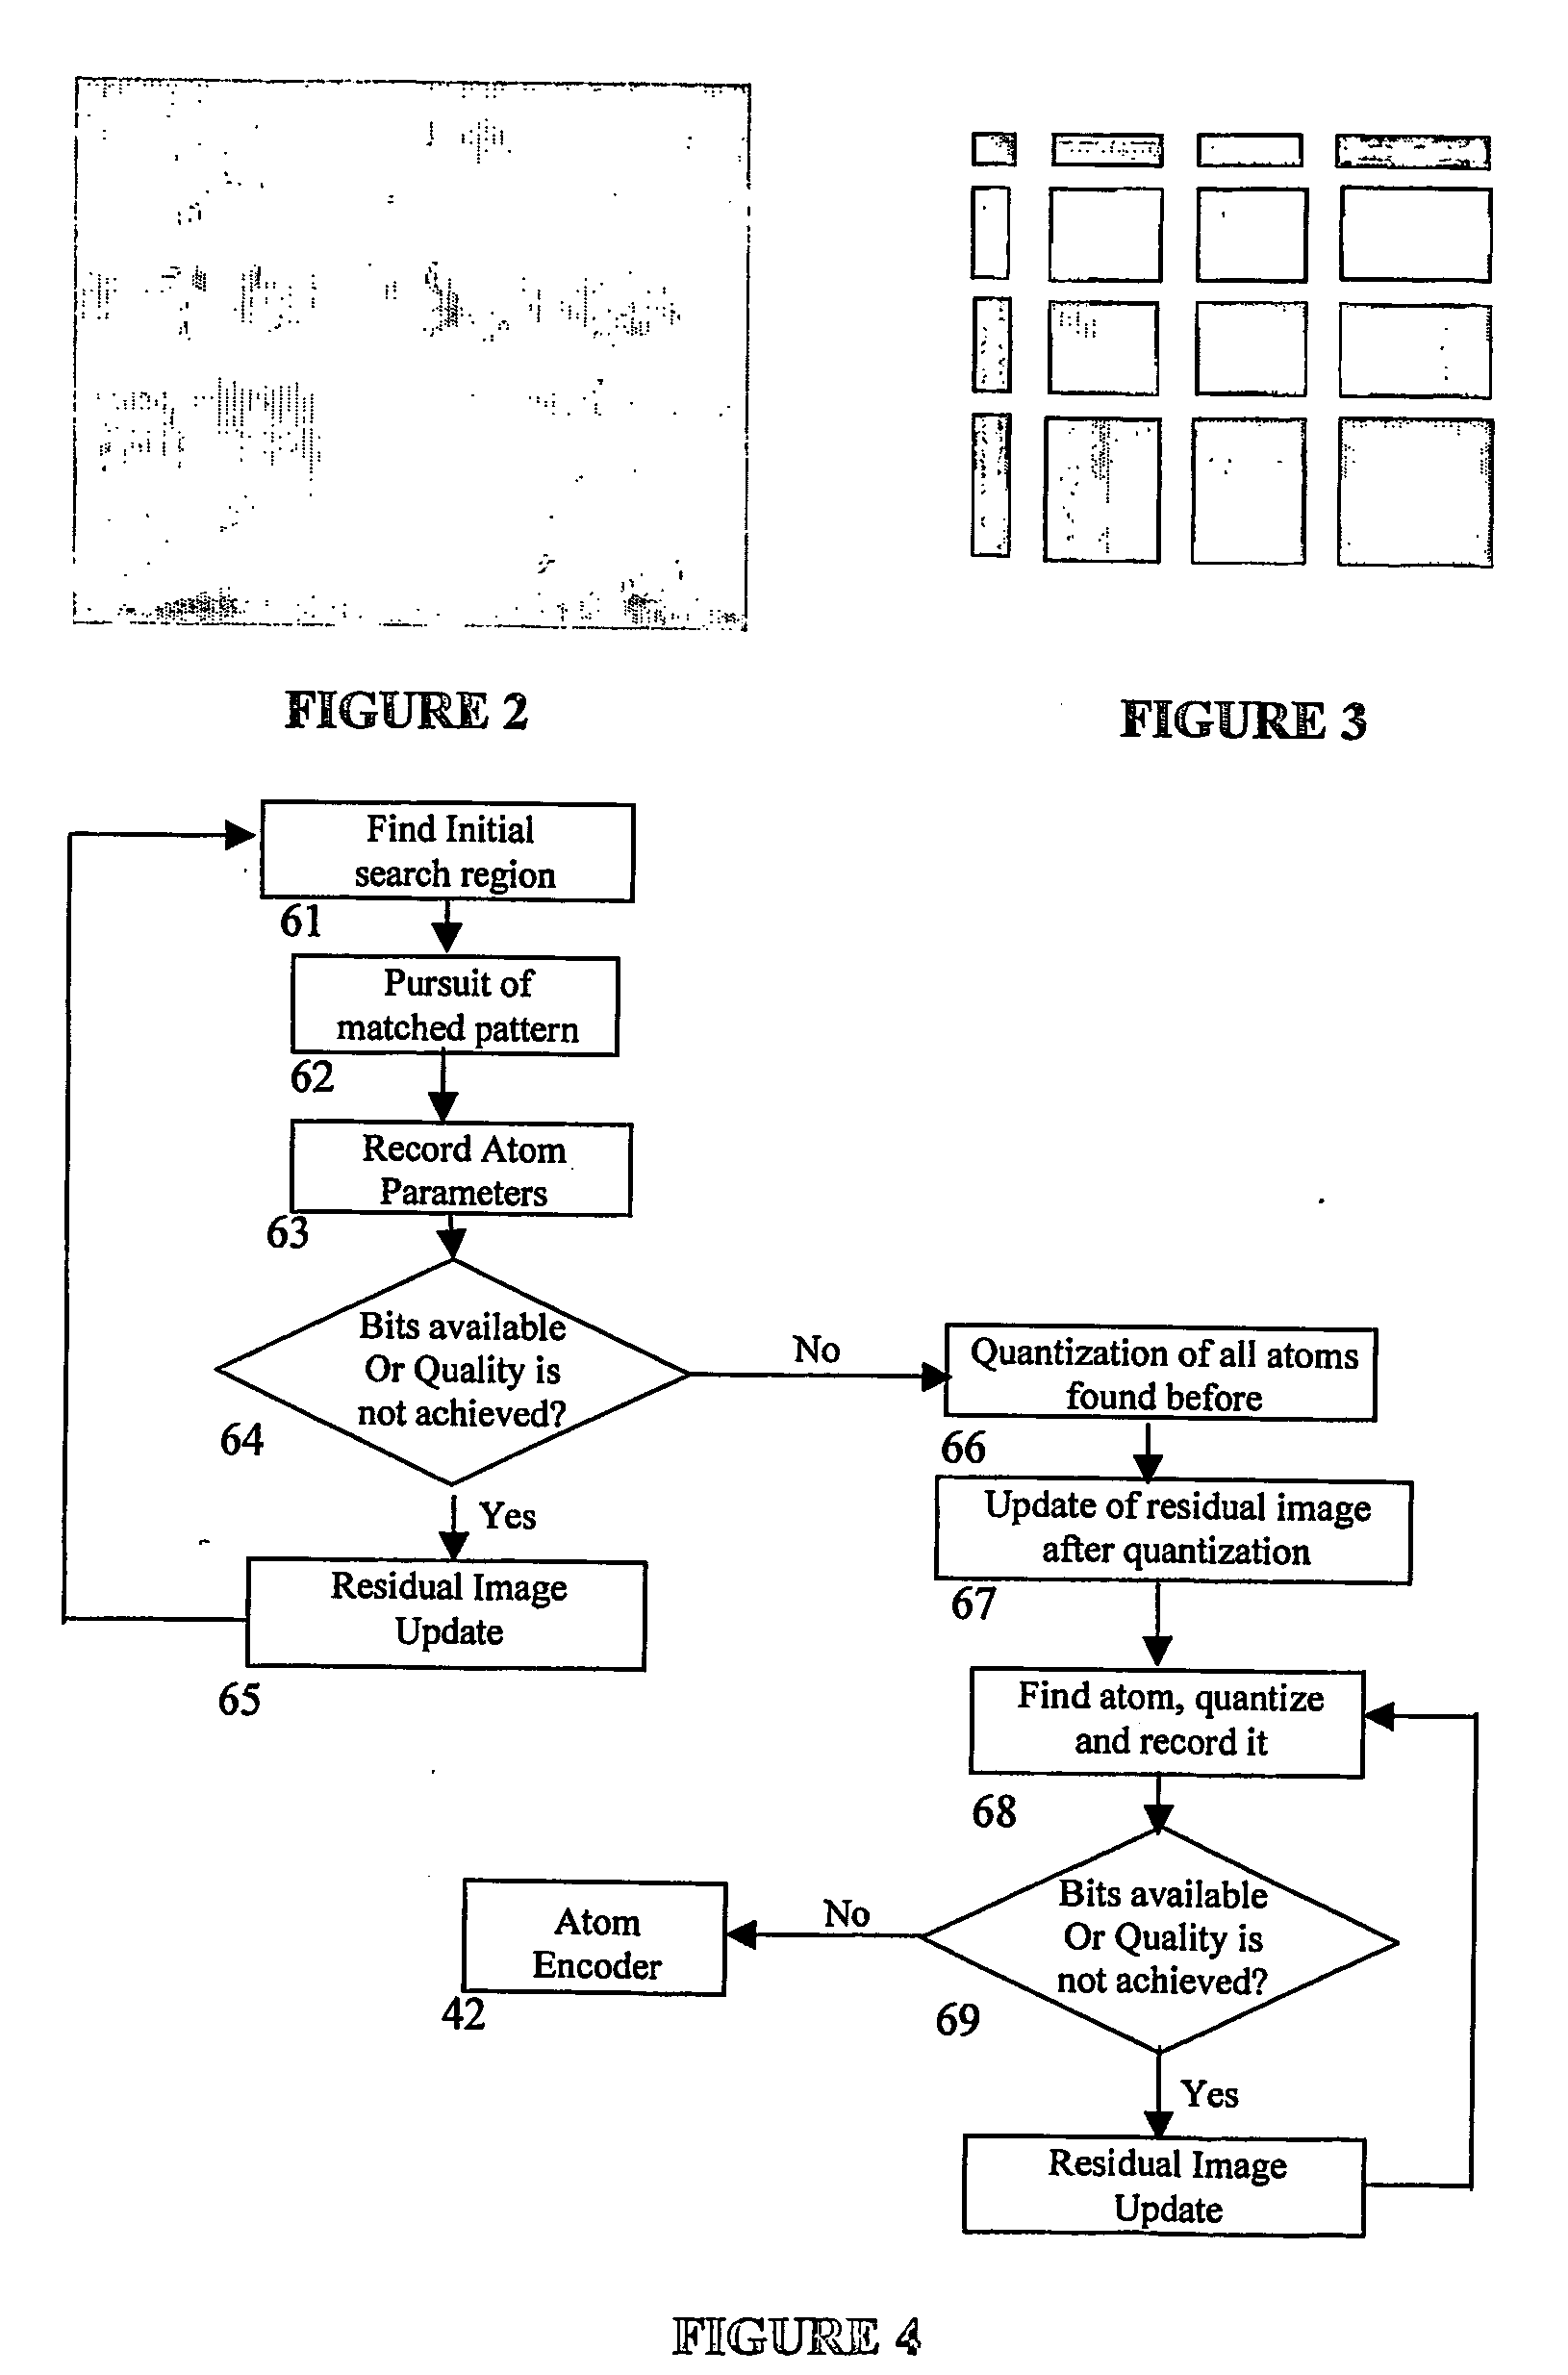 Overcomplete basis transform-based motion residual frame coding method and apparatus for video compression